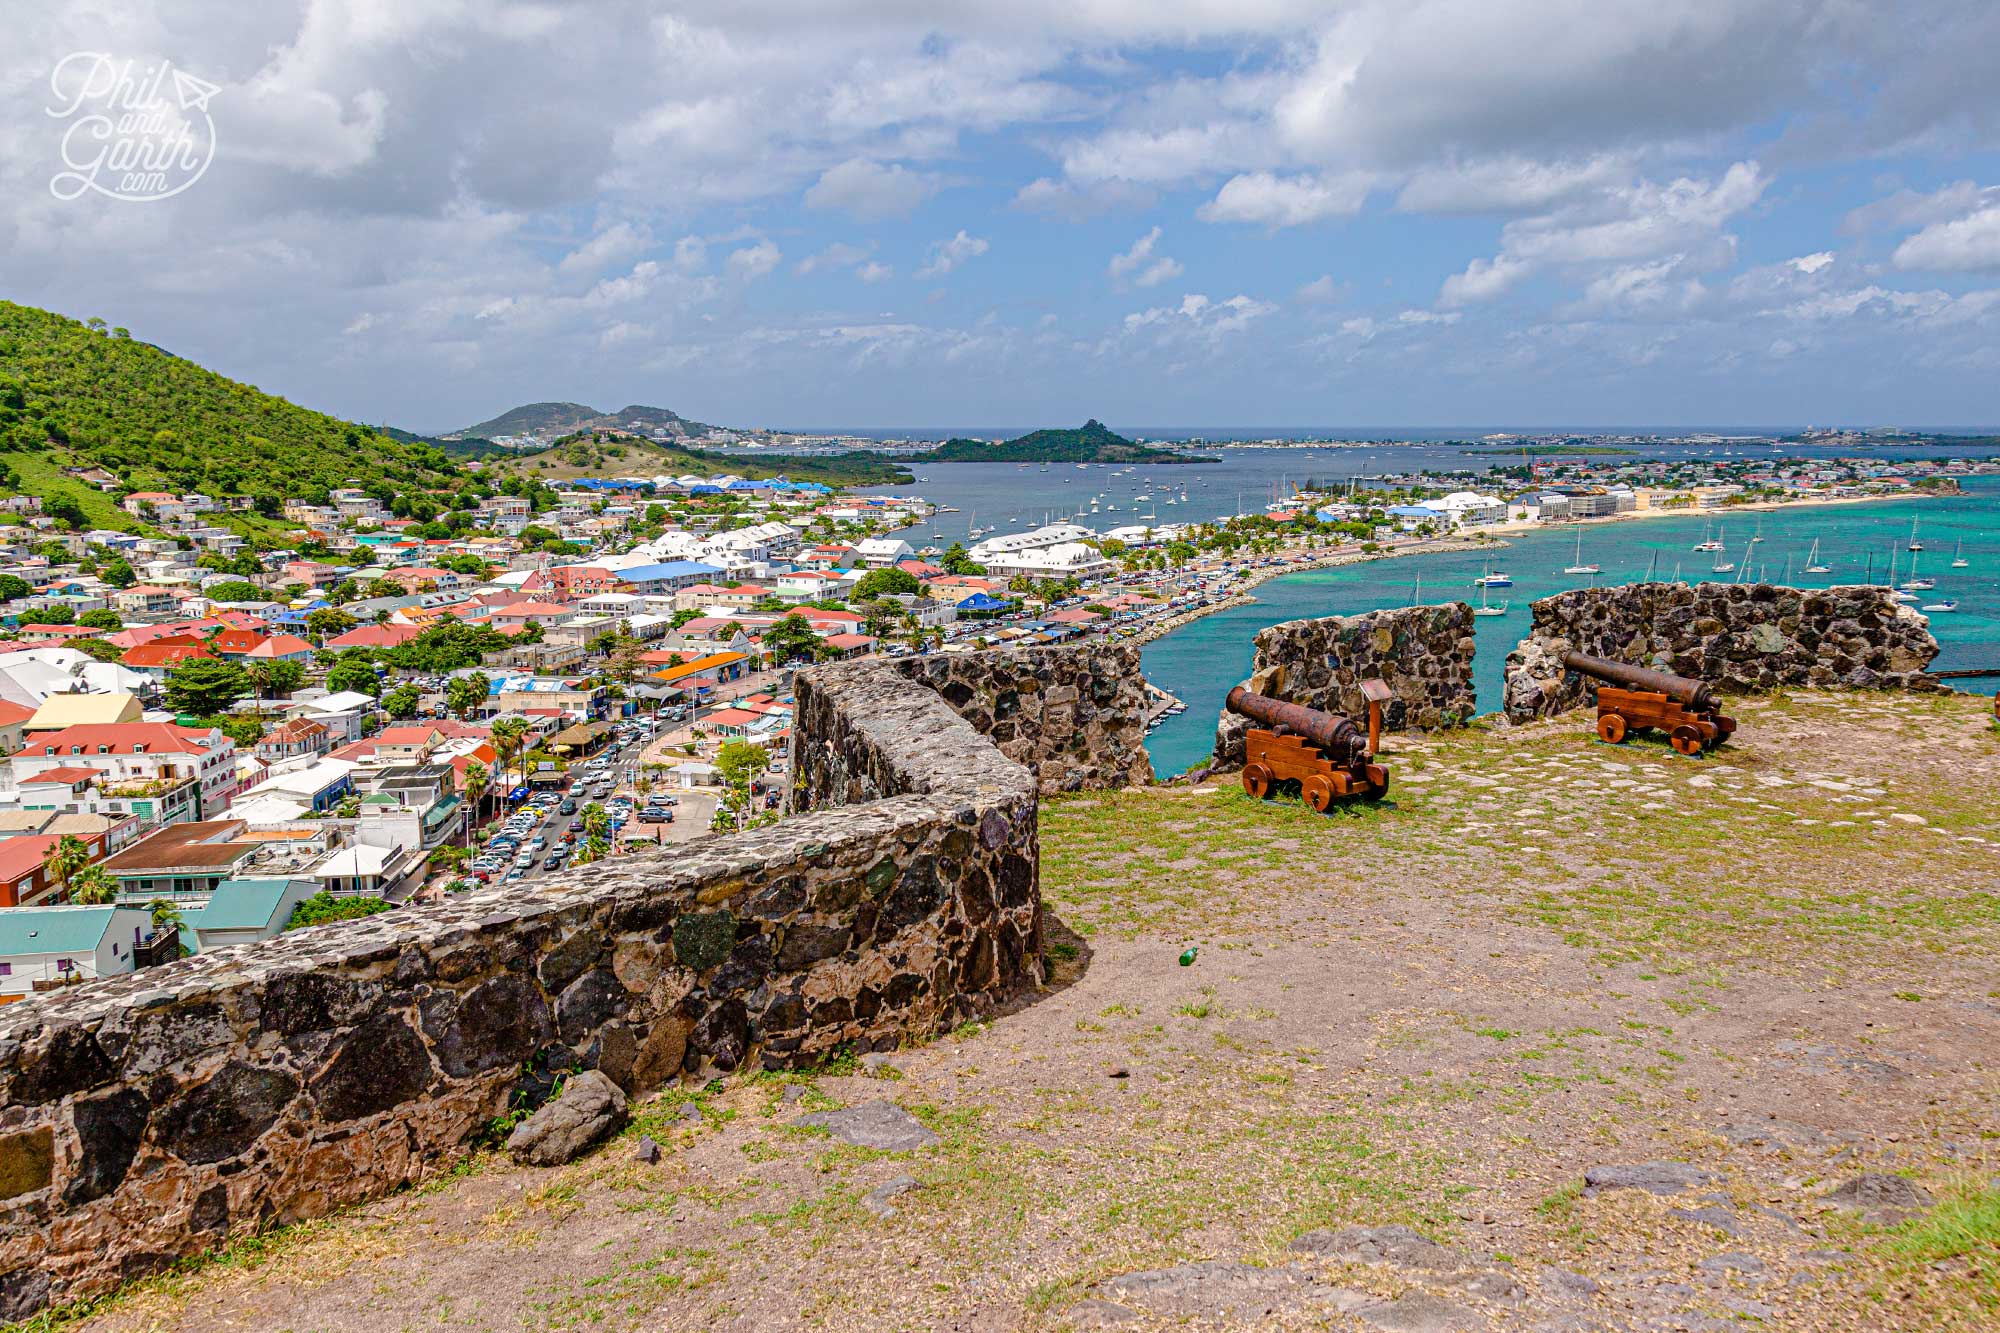 Impressive views of Marigot from Fort Louis